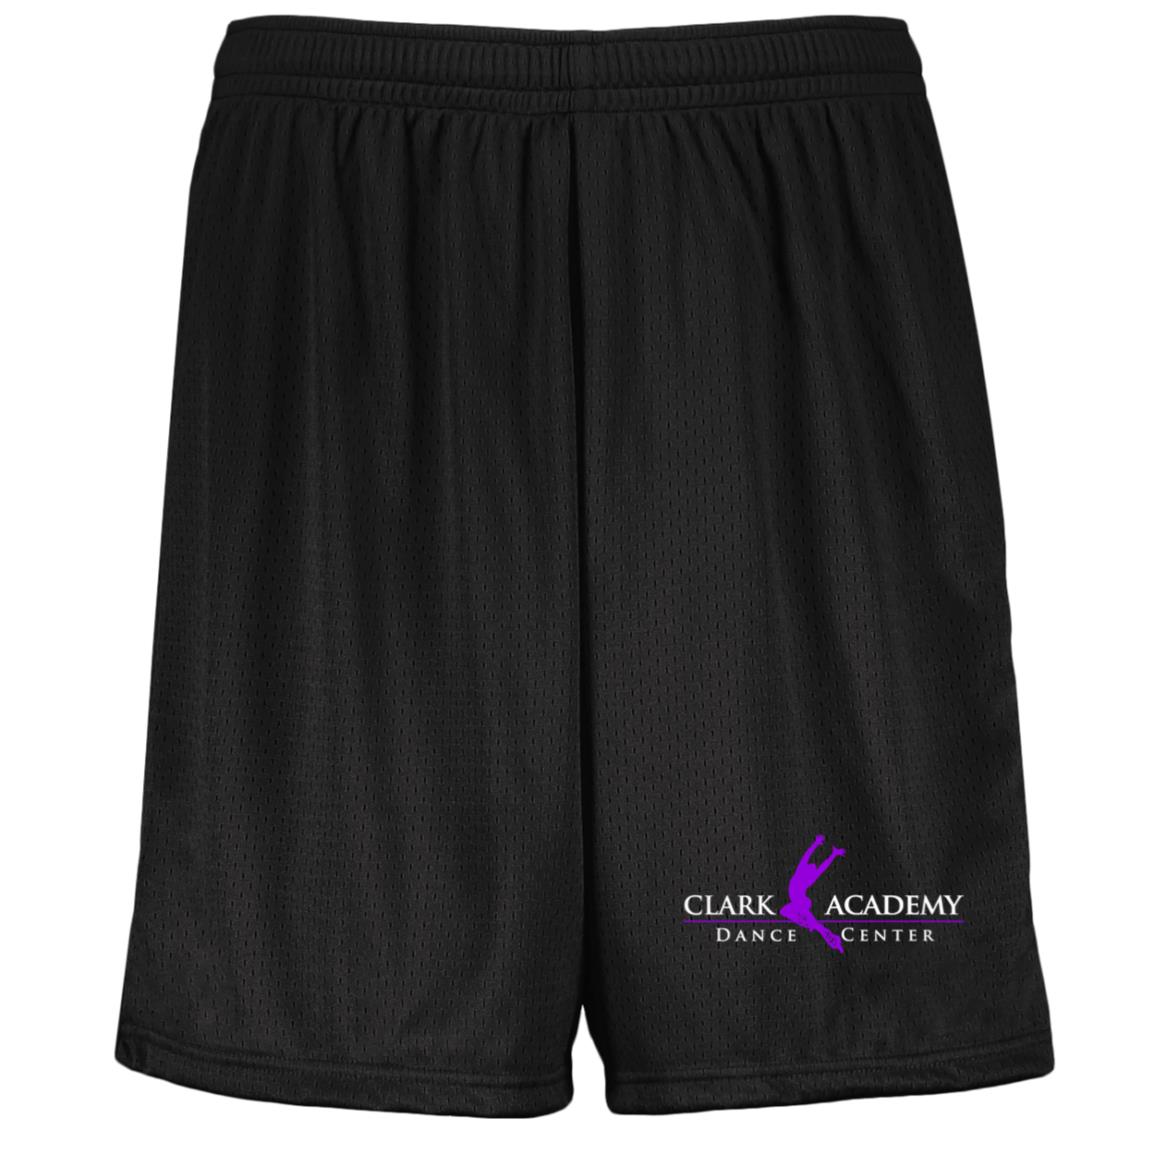 CADC Youth Shorts